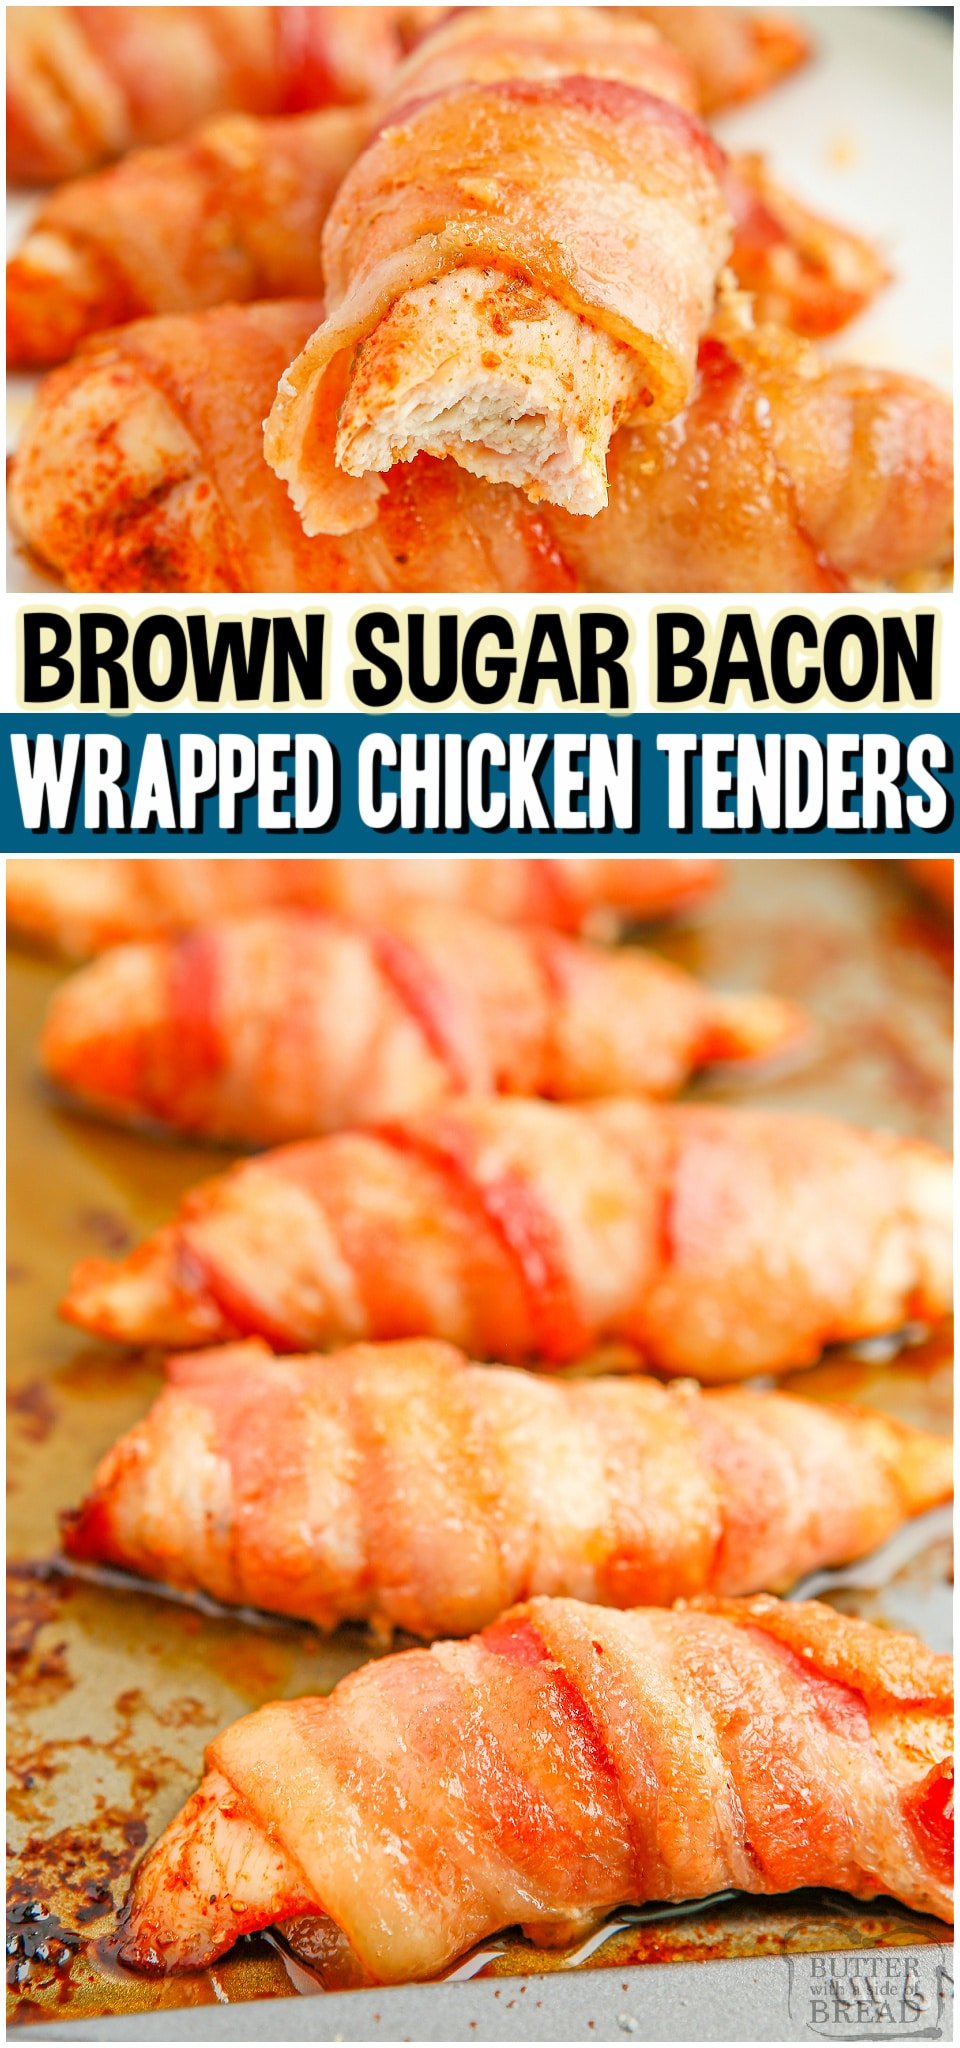 Bacon Wrapped Chicken Tenders made with simple, flavorful ingredients for a tasty appetizer or easy dinner! Easy chicken recipe made with bacon & brown sugar, which is always a winning combination! #bacon #chicken #brownsugar #appetizer #easyrecipe from BUTTER WITH A SIDE OF BREAD